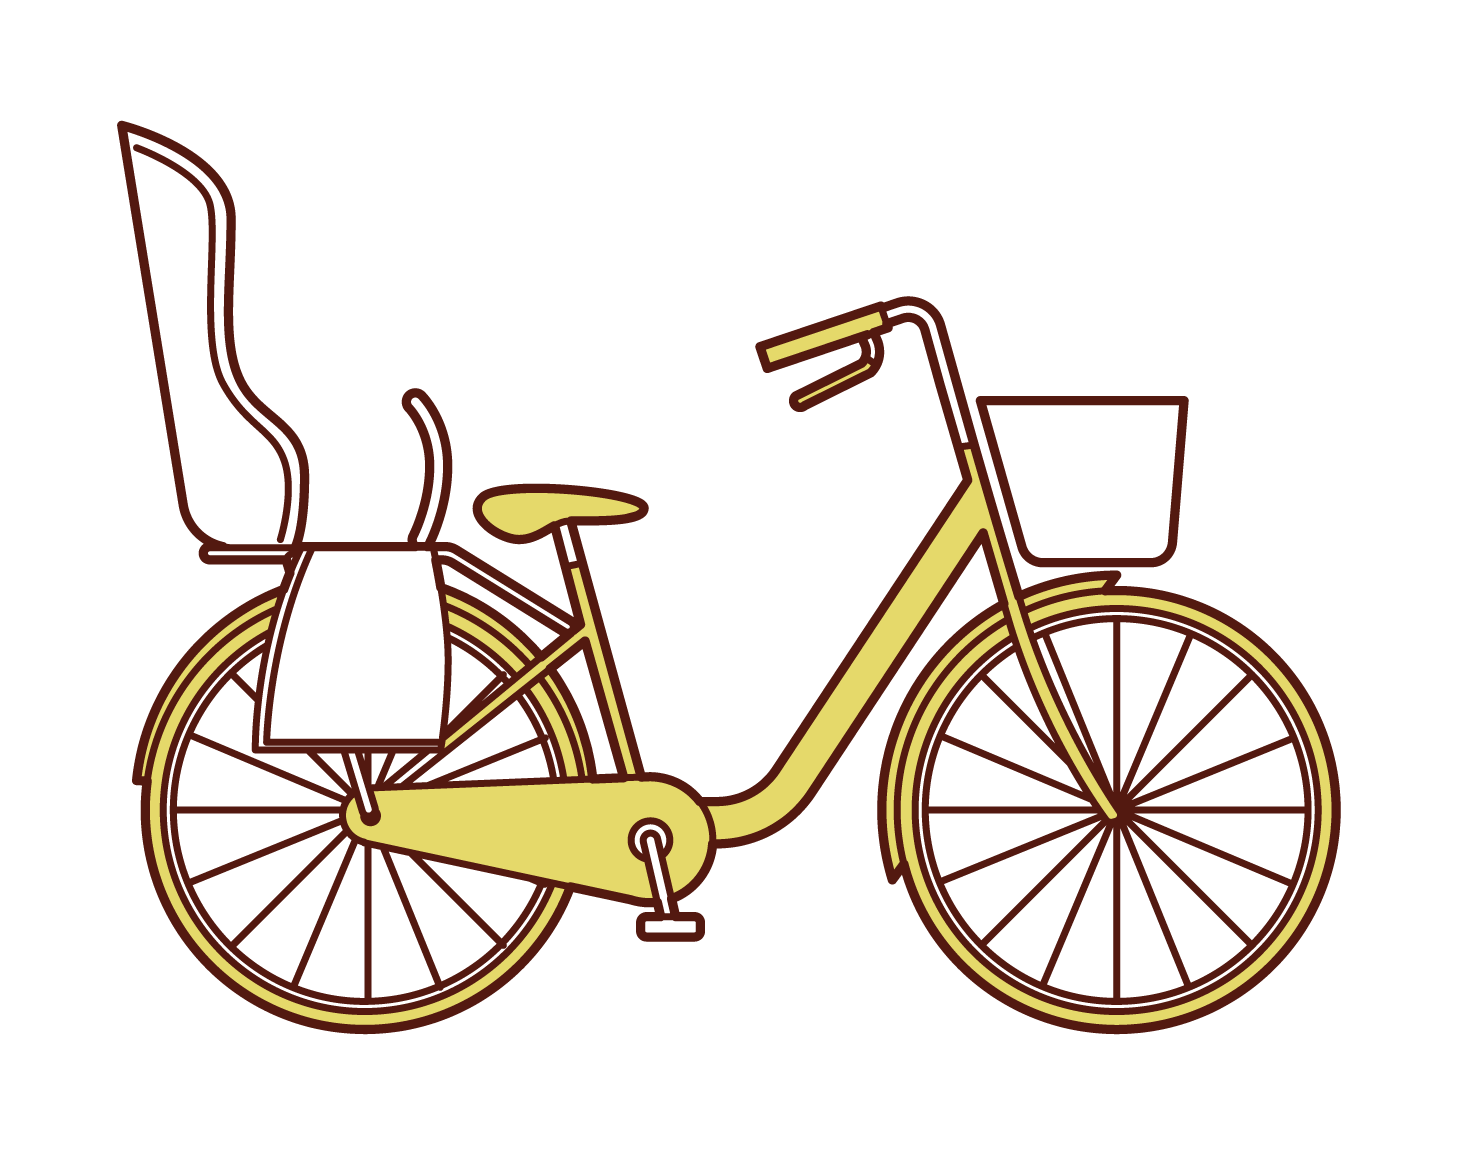 Illustration of a bicycle with a child seat